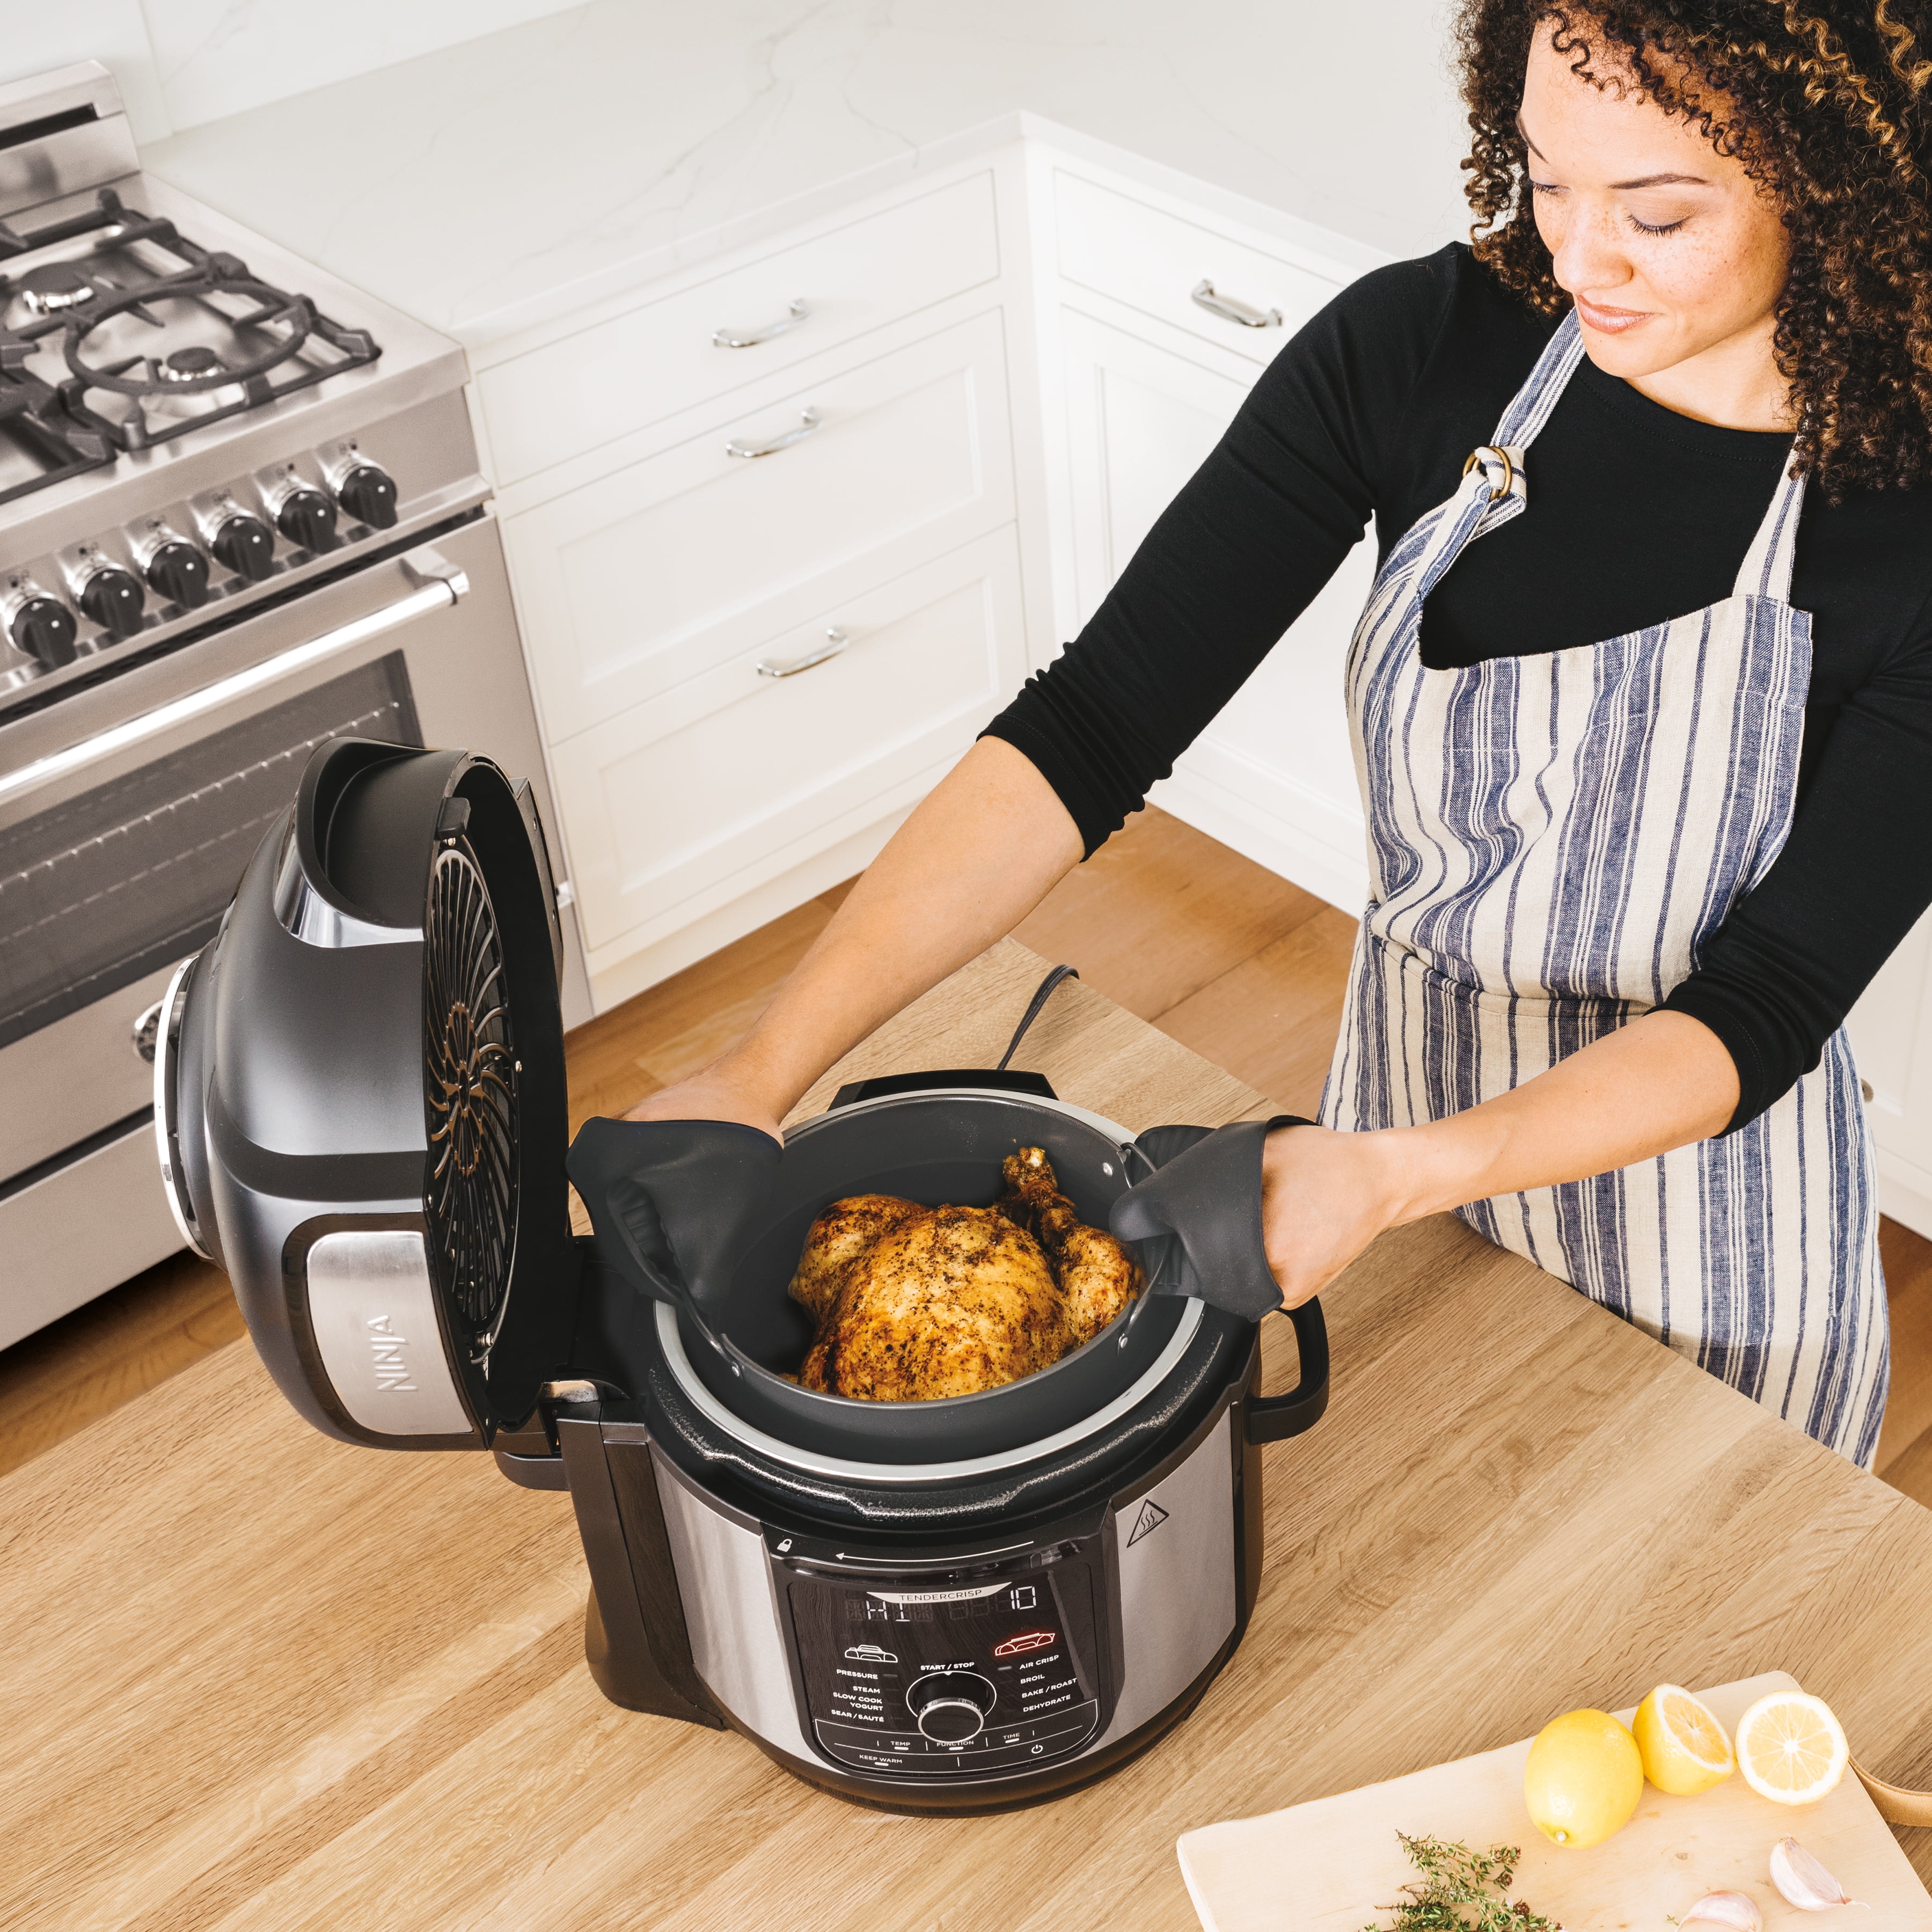 NINJA Foodi 8 Qt. Stainless Steel Pressure Cooker and Air Fryer FD401 - The  Home Depot